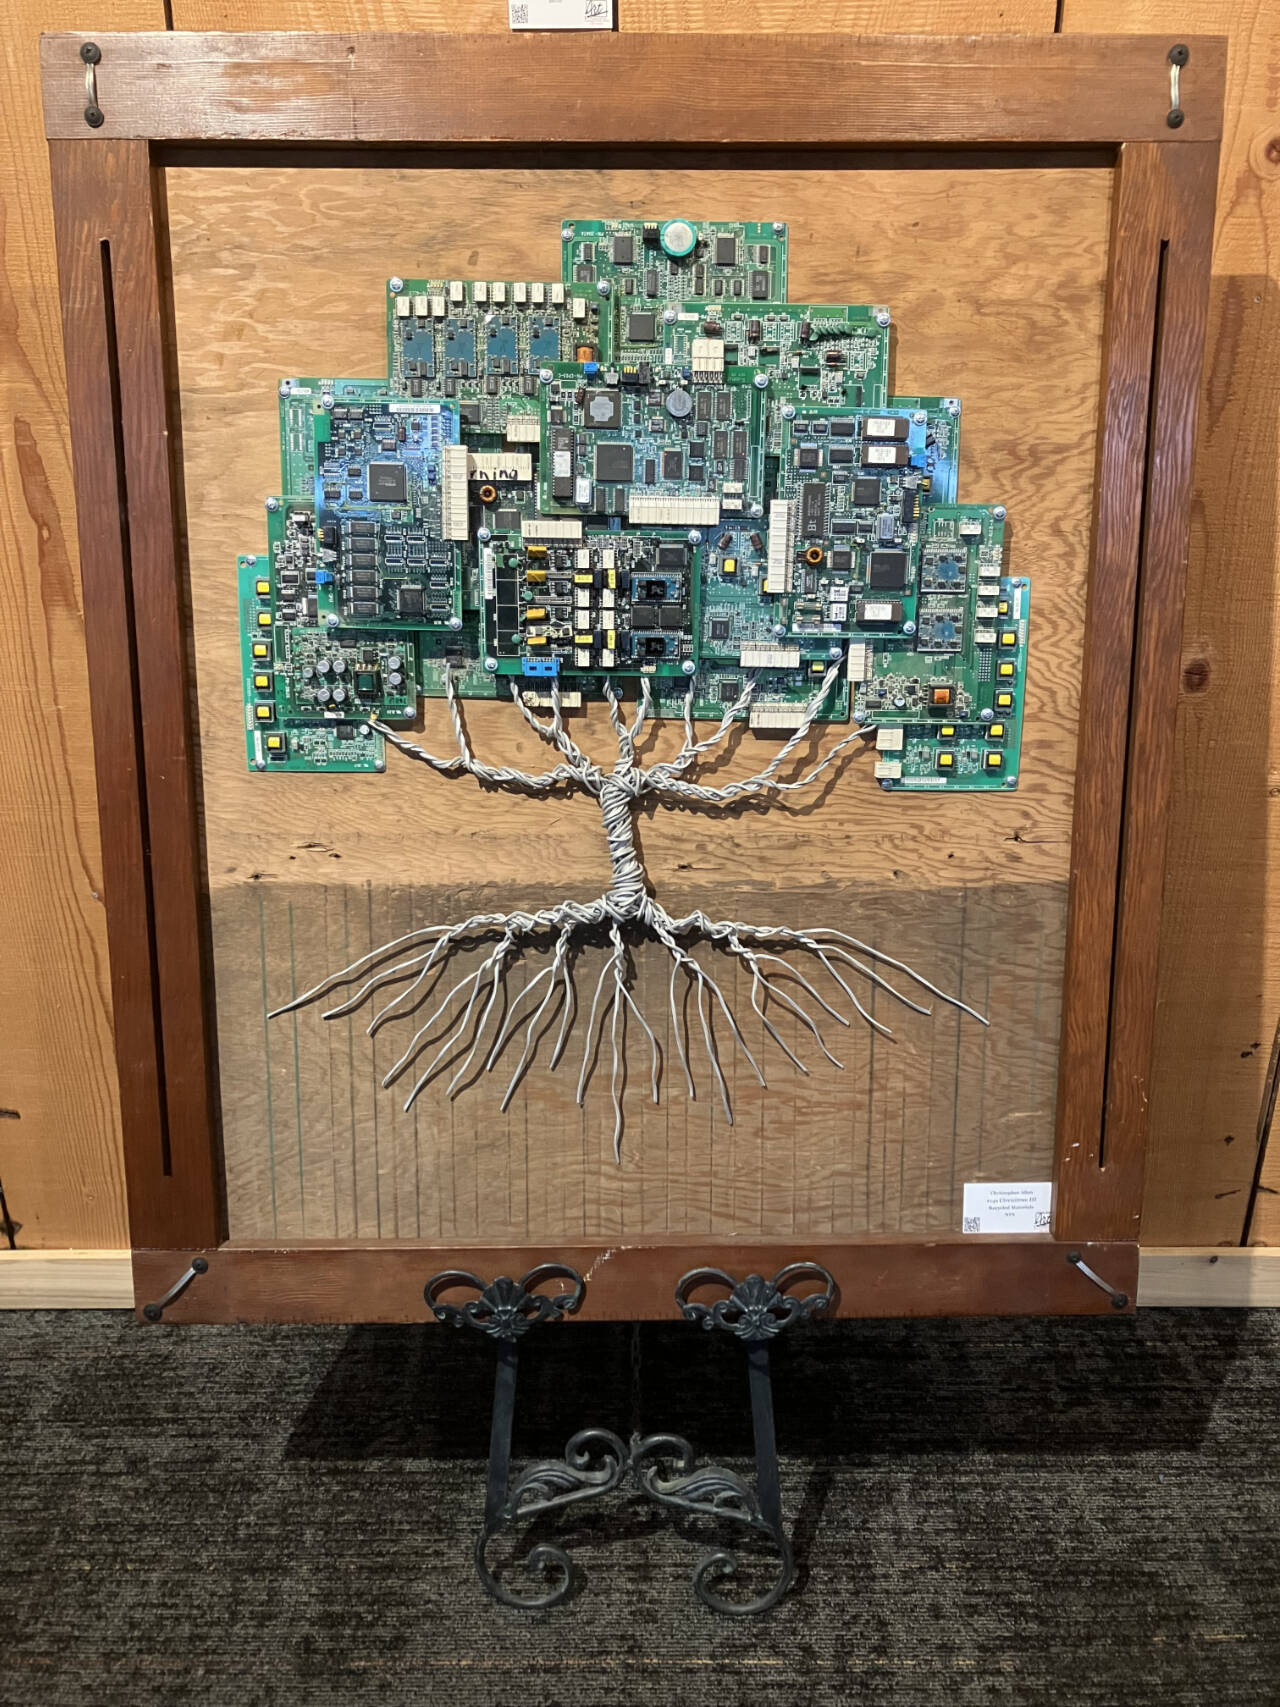 Submitted photo
Made from recycled material, “Circuitree” by Christopher Allen is on display in the Judith McInnes Tozzer Art Gallery at Sequim Museum & Arts, 544 N. Sequim Ave.